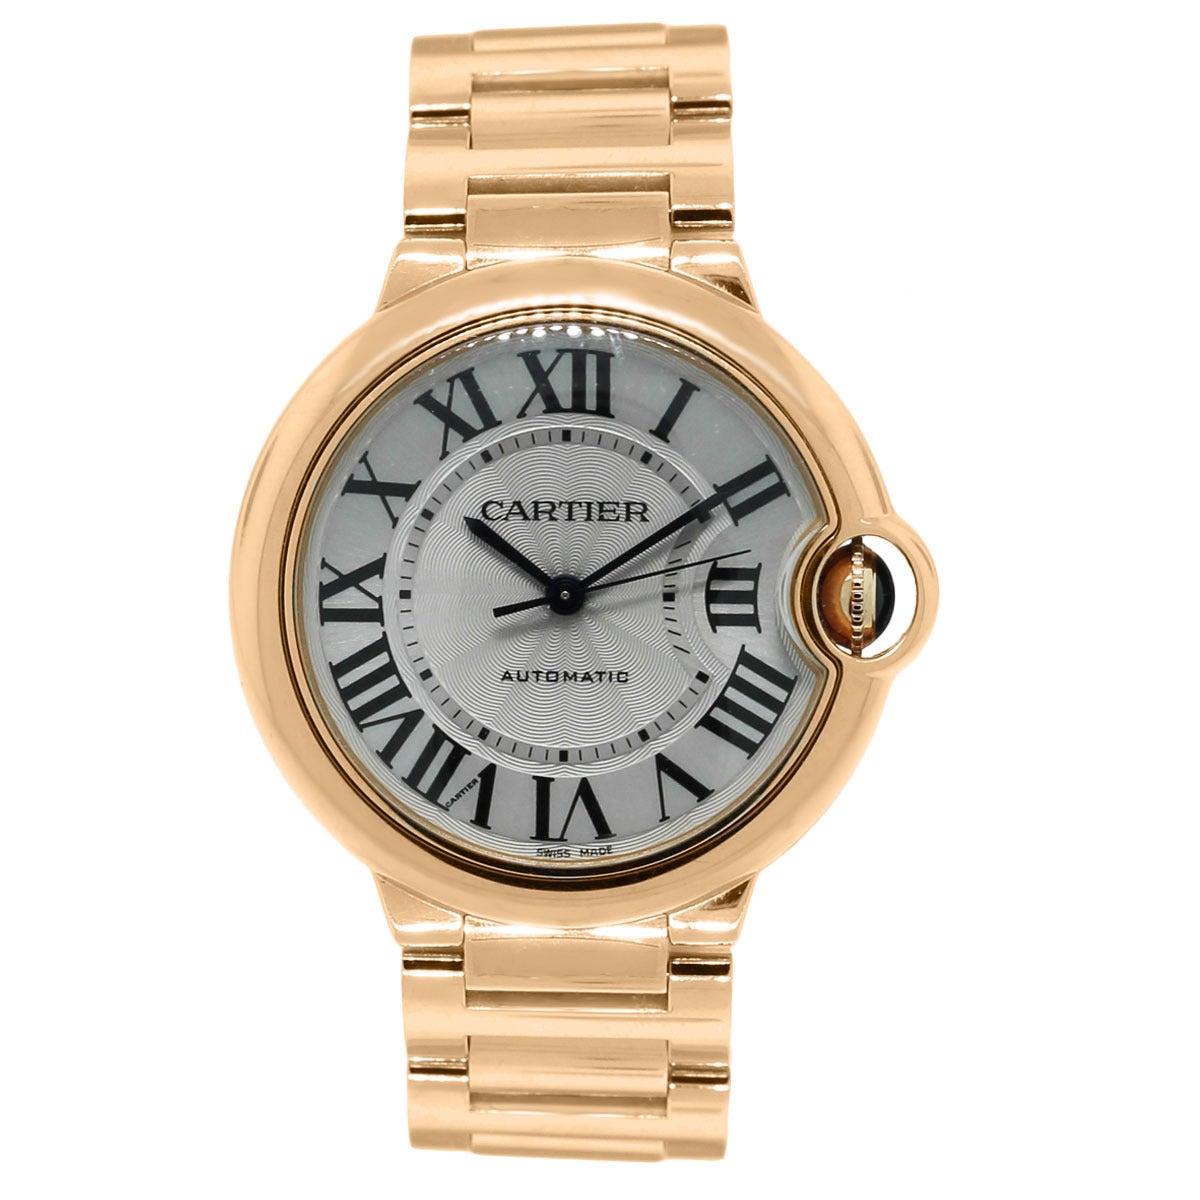 Brand: Cartier
Reference: W69004Z2
Case Material: 18k Rose Gold
Movement: Automatic
Case Measurement: 36mm
Dial: White Dial
Crystal: Scratch Resistant Sapphire
Clasp: Double Fold Over Clasp
Size: Will Fit a 6